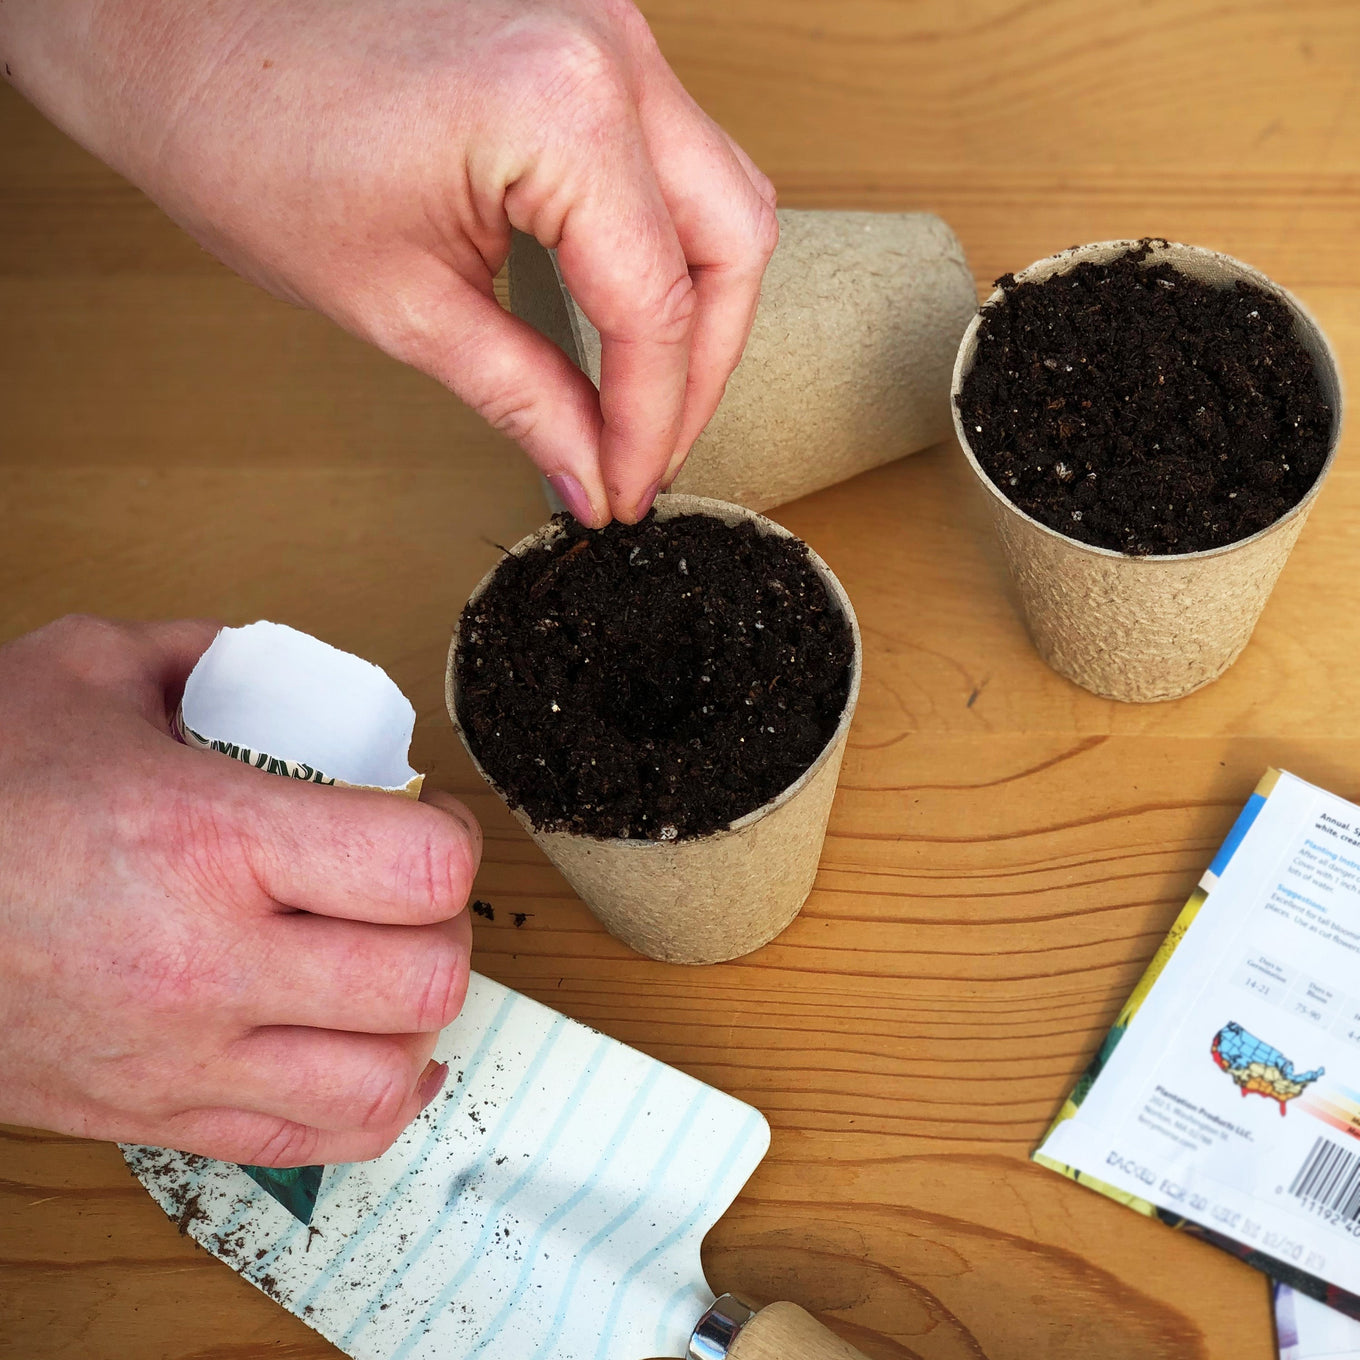 Start Crimson Sweet Watermelon seeds in biodegradable paper or peat pots.